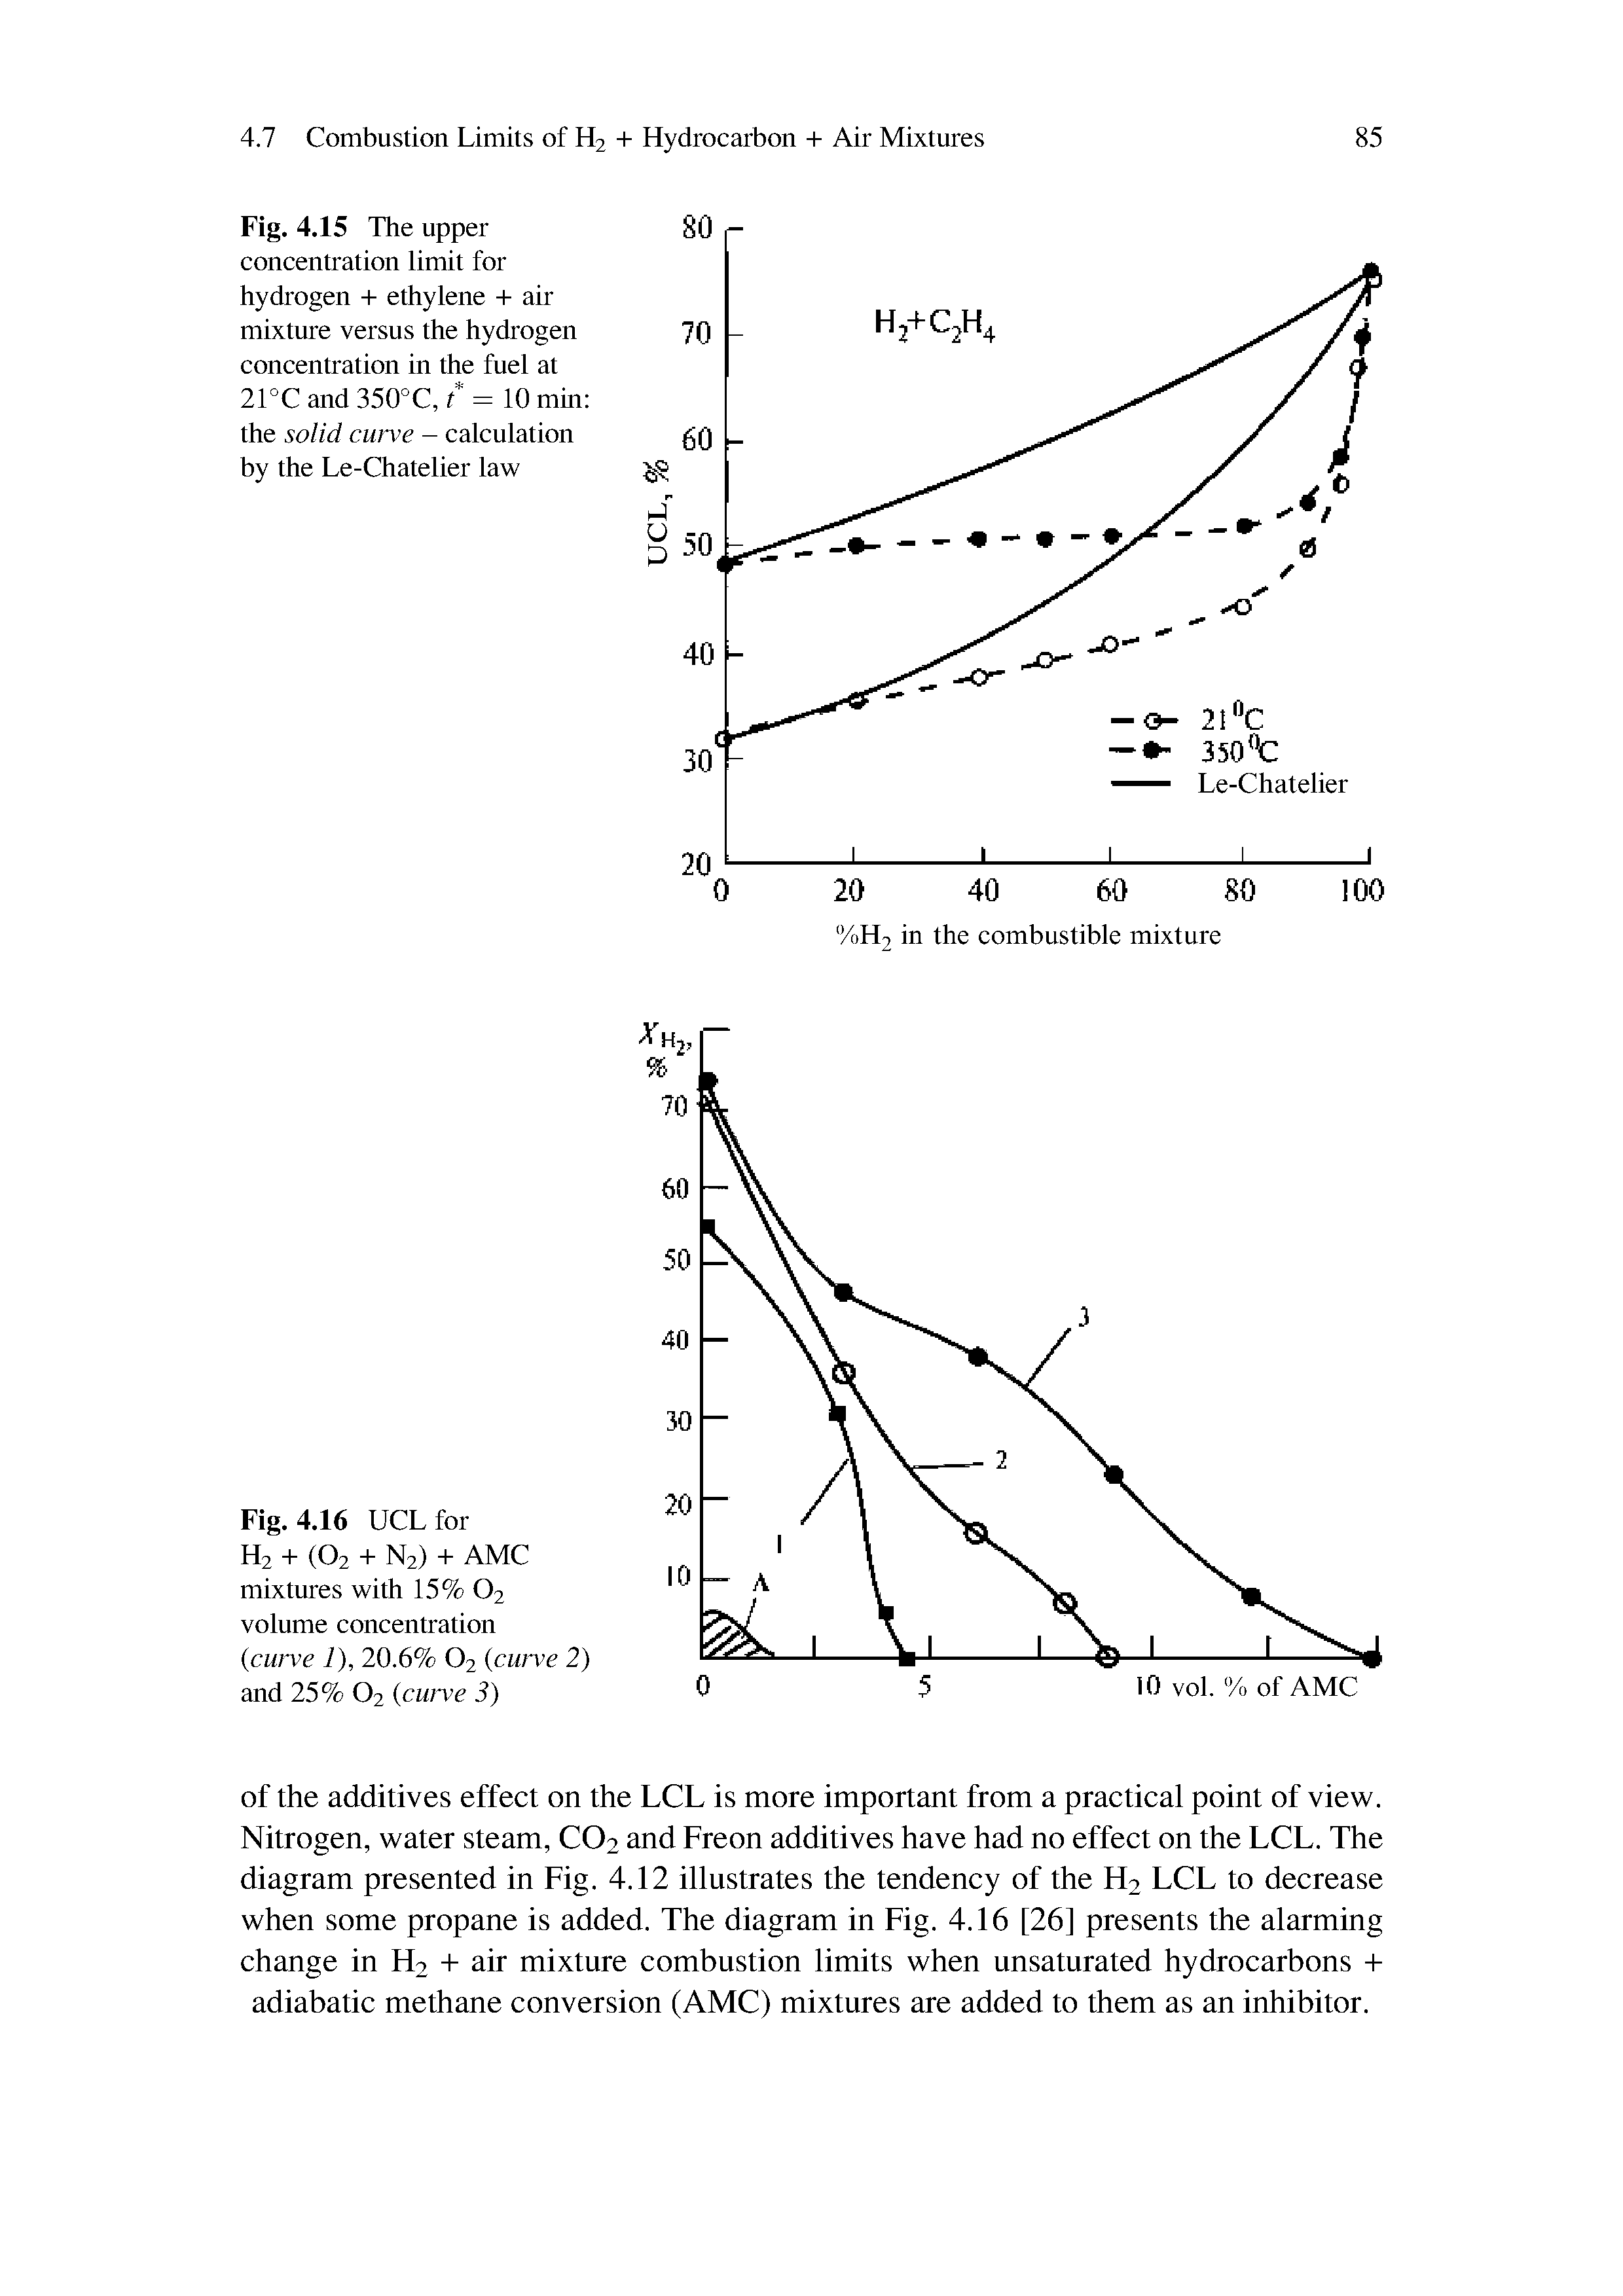 Fig. 4.15 The upper concentration limit for hydrogen + ethylene + air mixture versus the hydrogen concentration in the fuel at 21°C and 350°C, t = 10 min the solid cwve - calculation by the Le-Chatelier law...